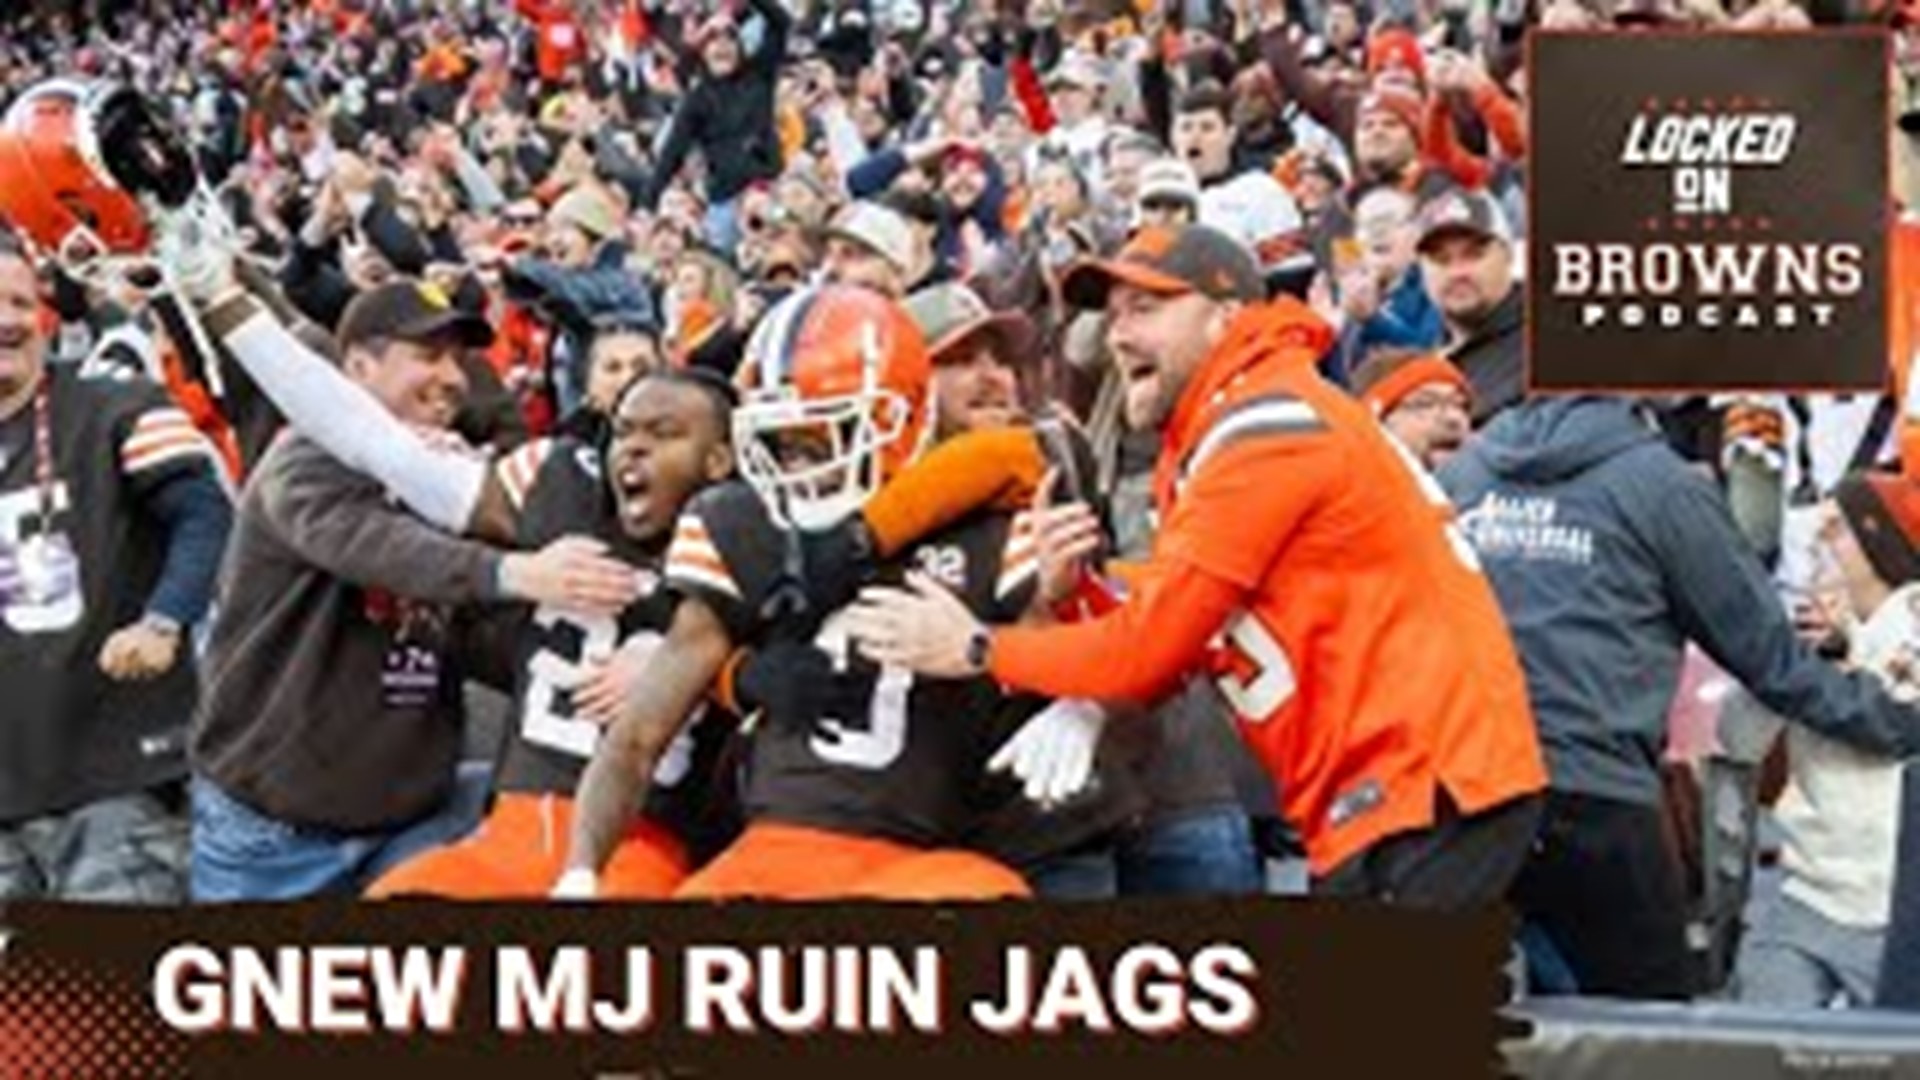 The Cleveland Browns come away with a huge victory against the Jacksonville Jaguars.